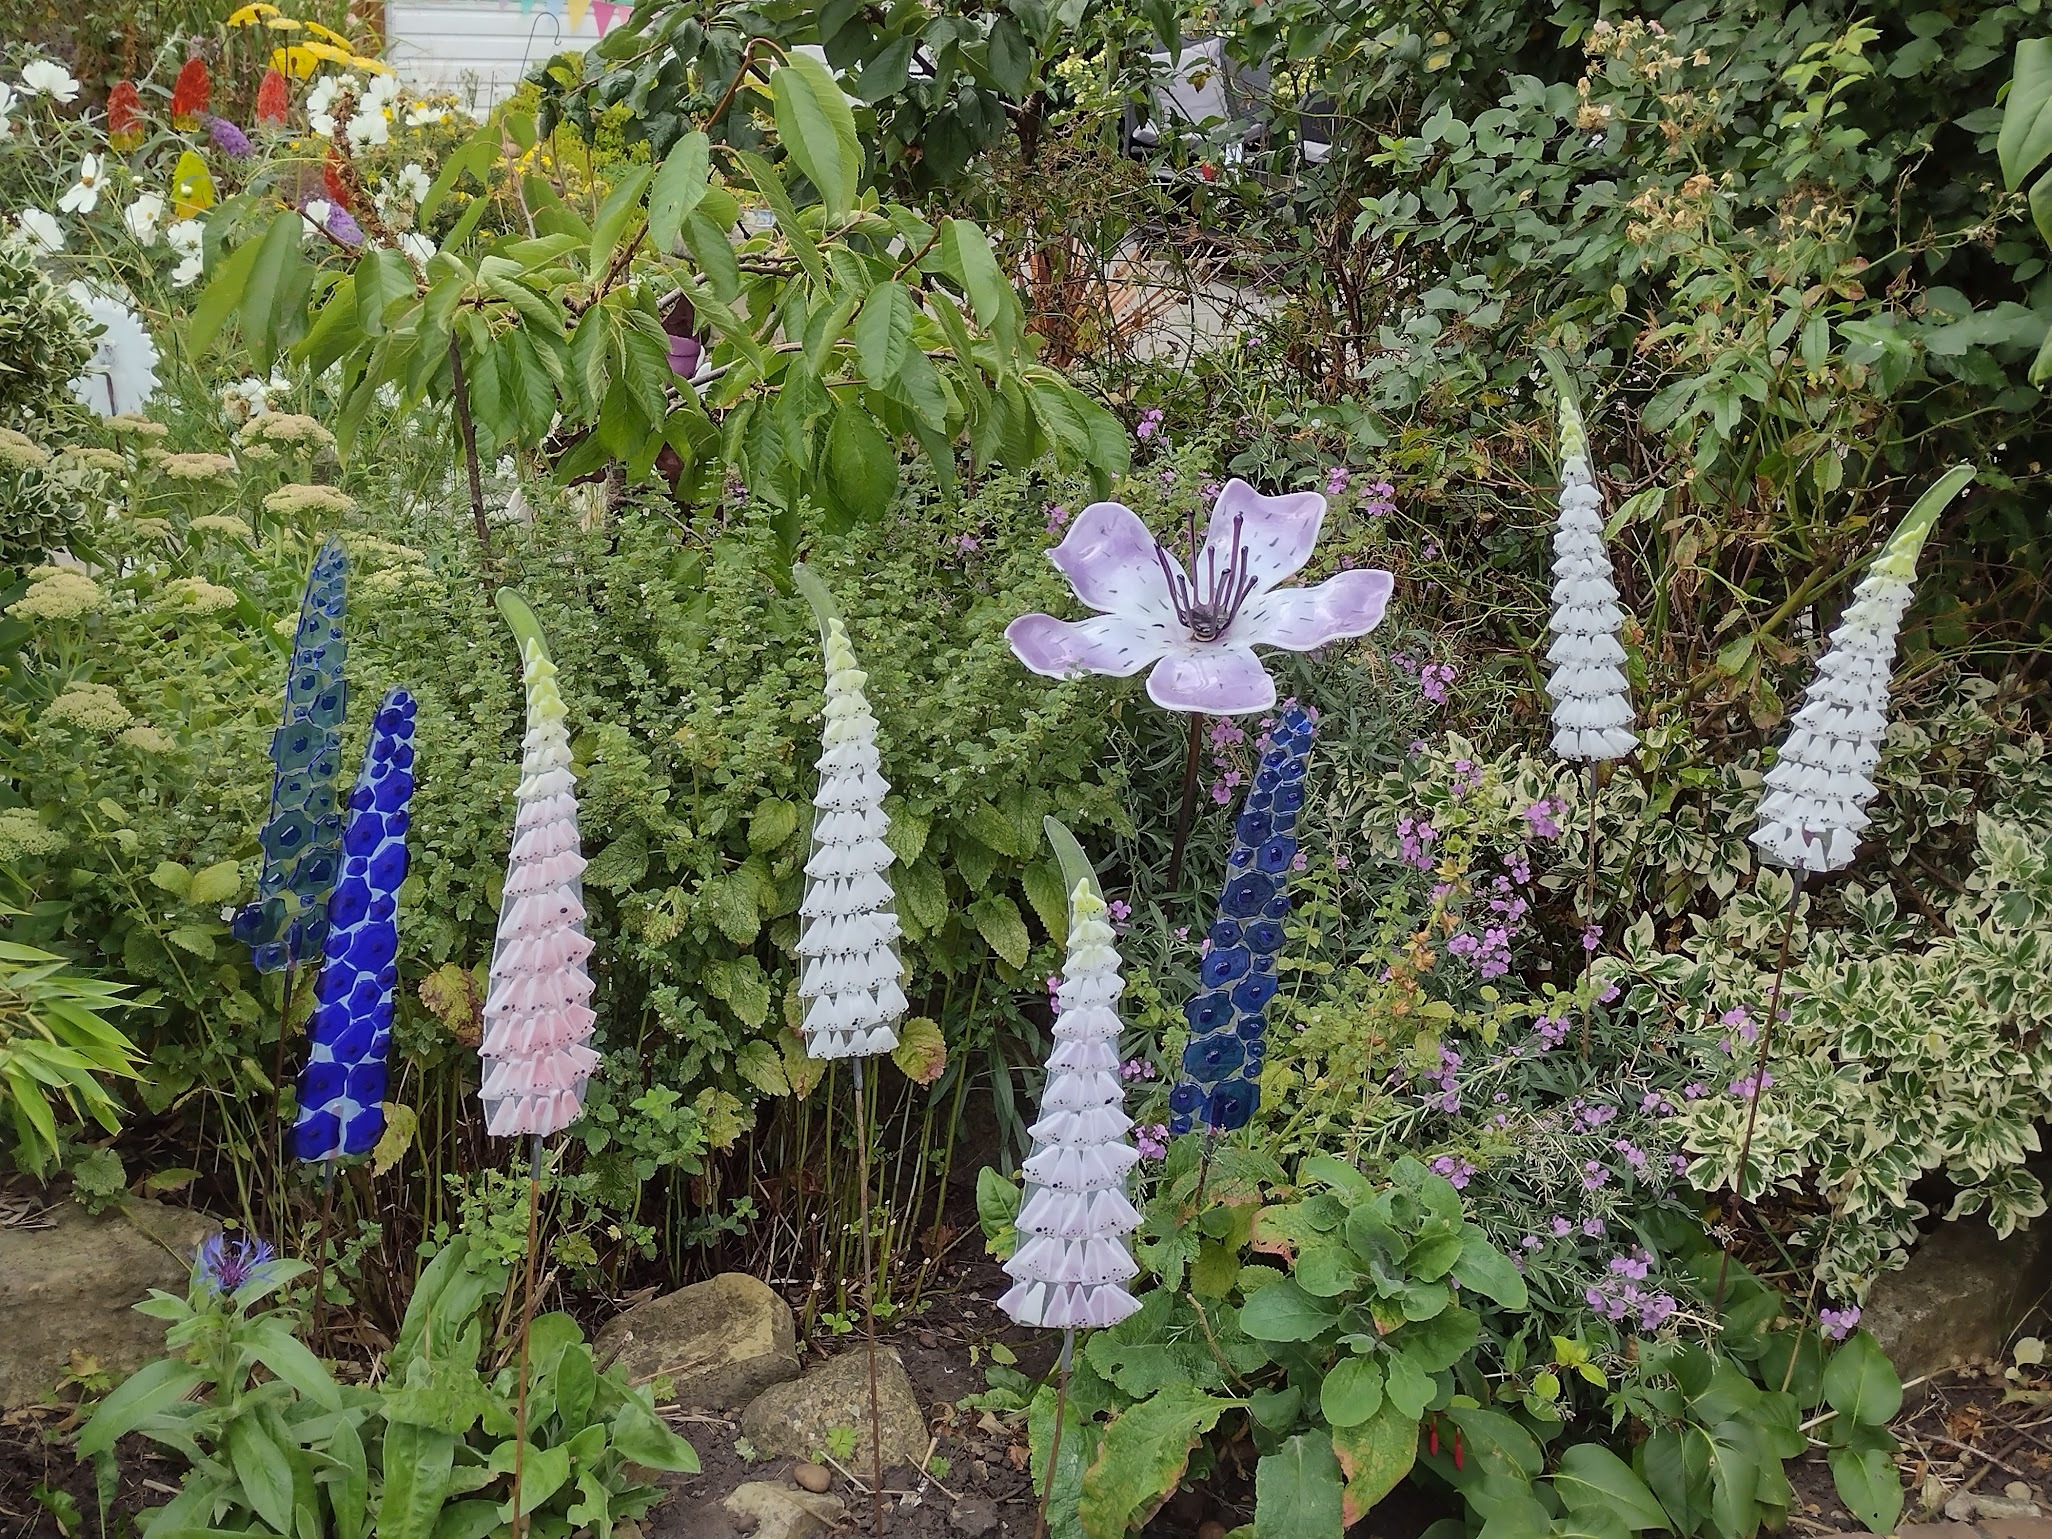 Wendy Stafford’s floral ‘sculptures’ in glass are on permanent display in her garden